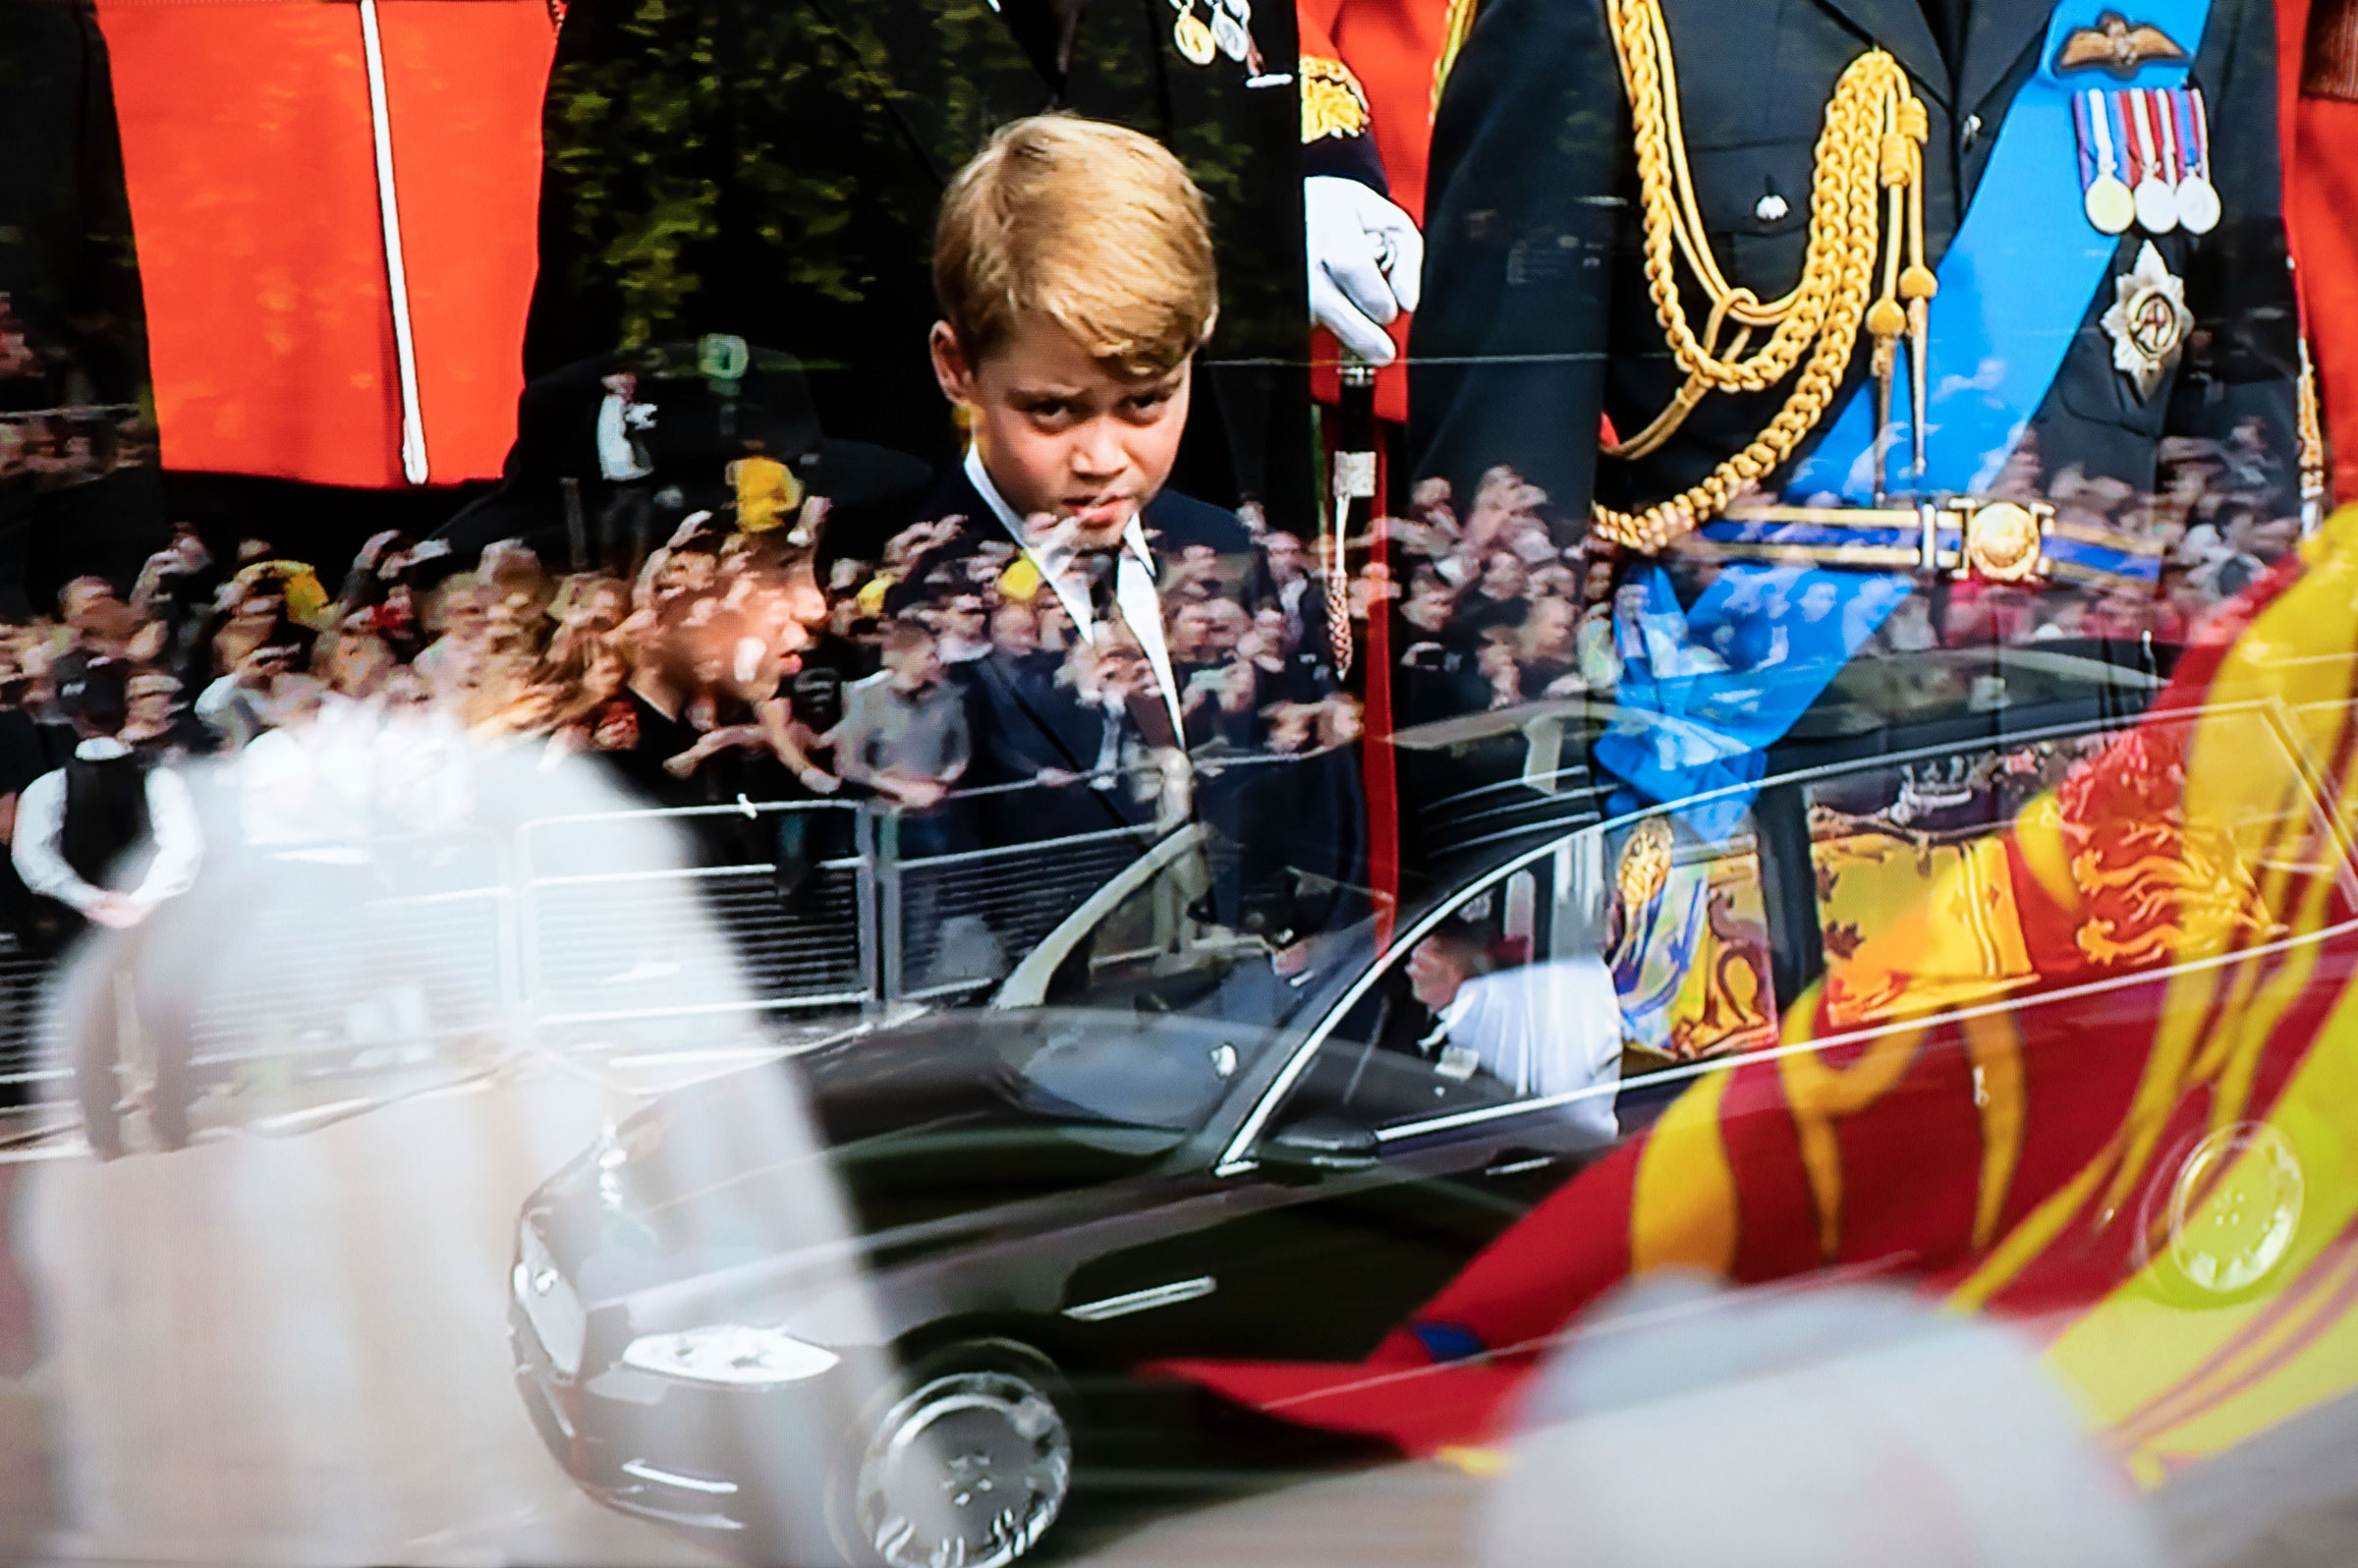 Photographed from a television broadcast, Queen Elizabeth's coffin in the State Hearse is driven to Windsor past crowds lining the road with Prince George, second in line to the throne, in the background. (Ian Berry—Magnum Photos)